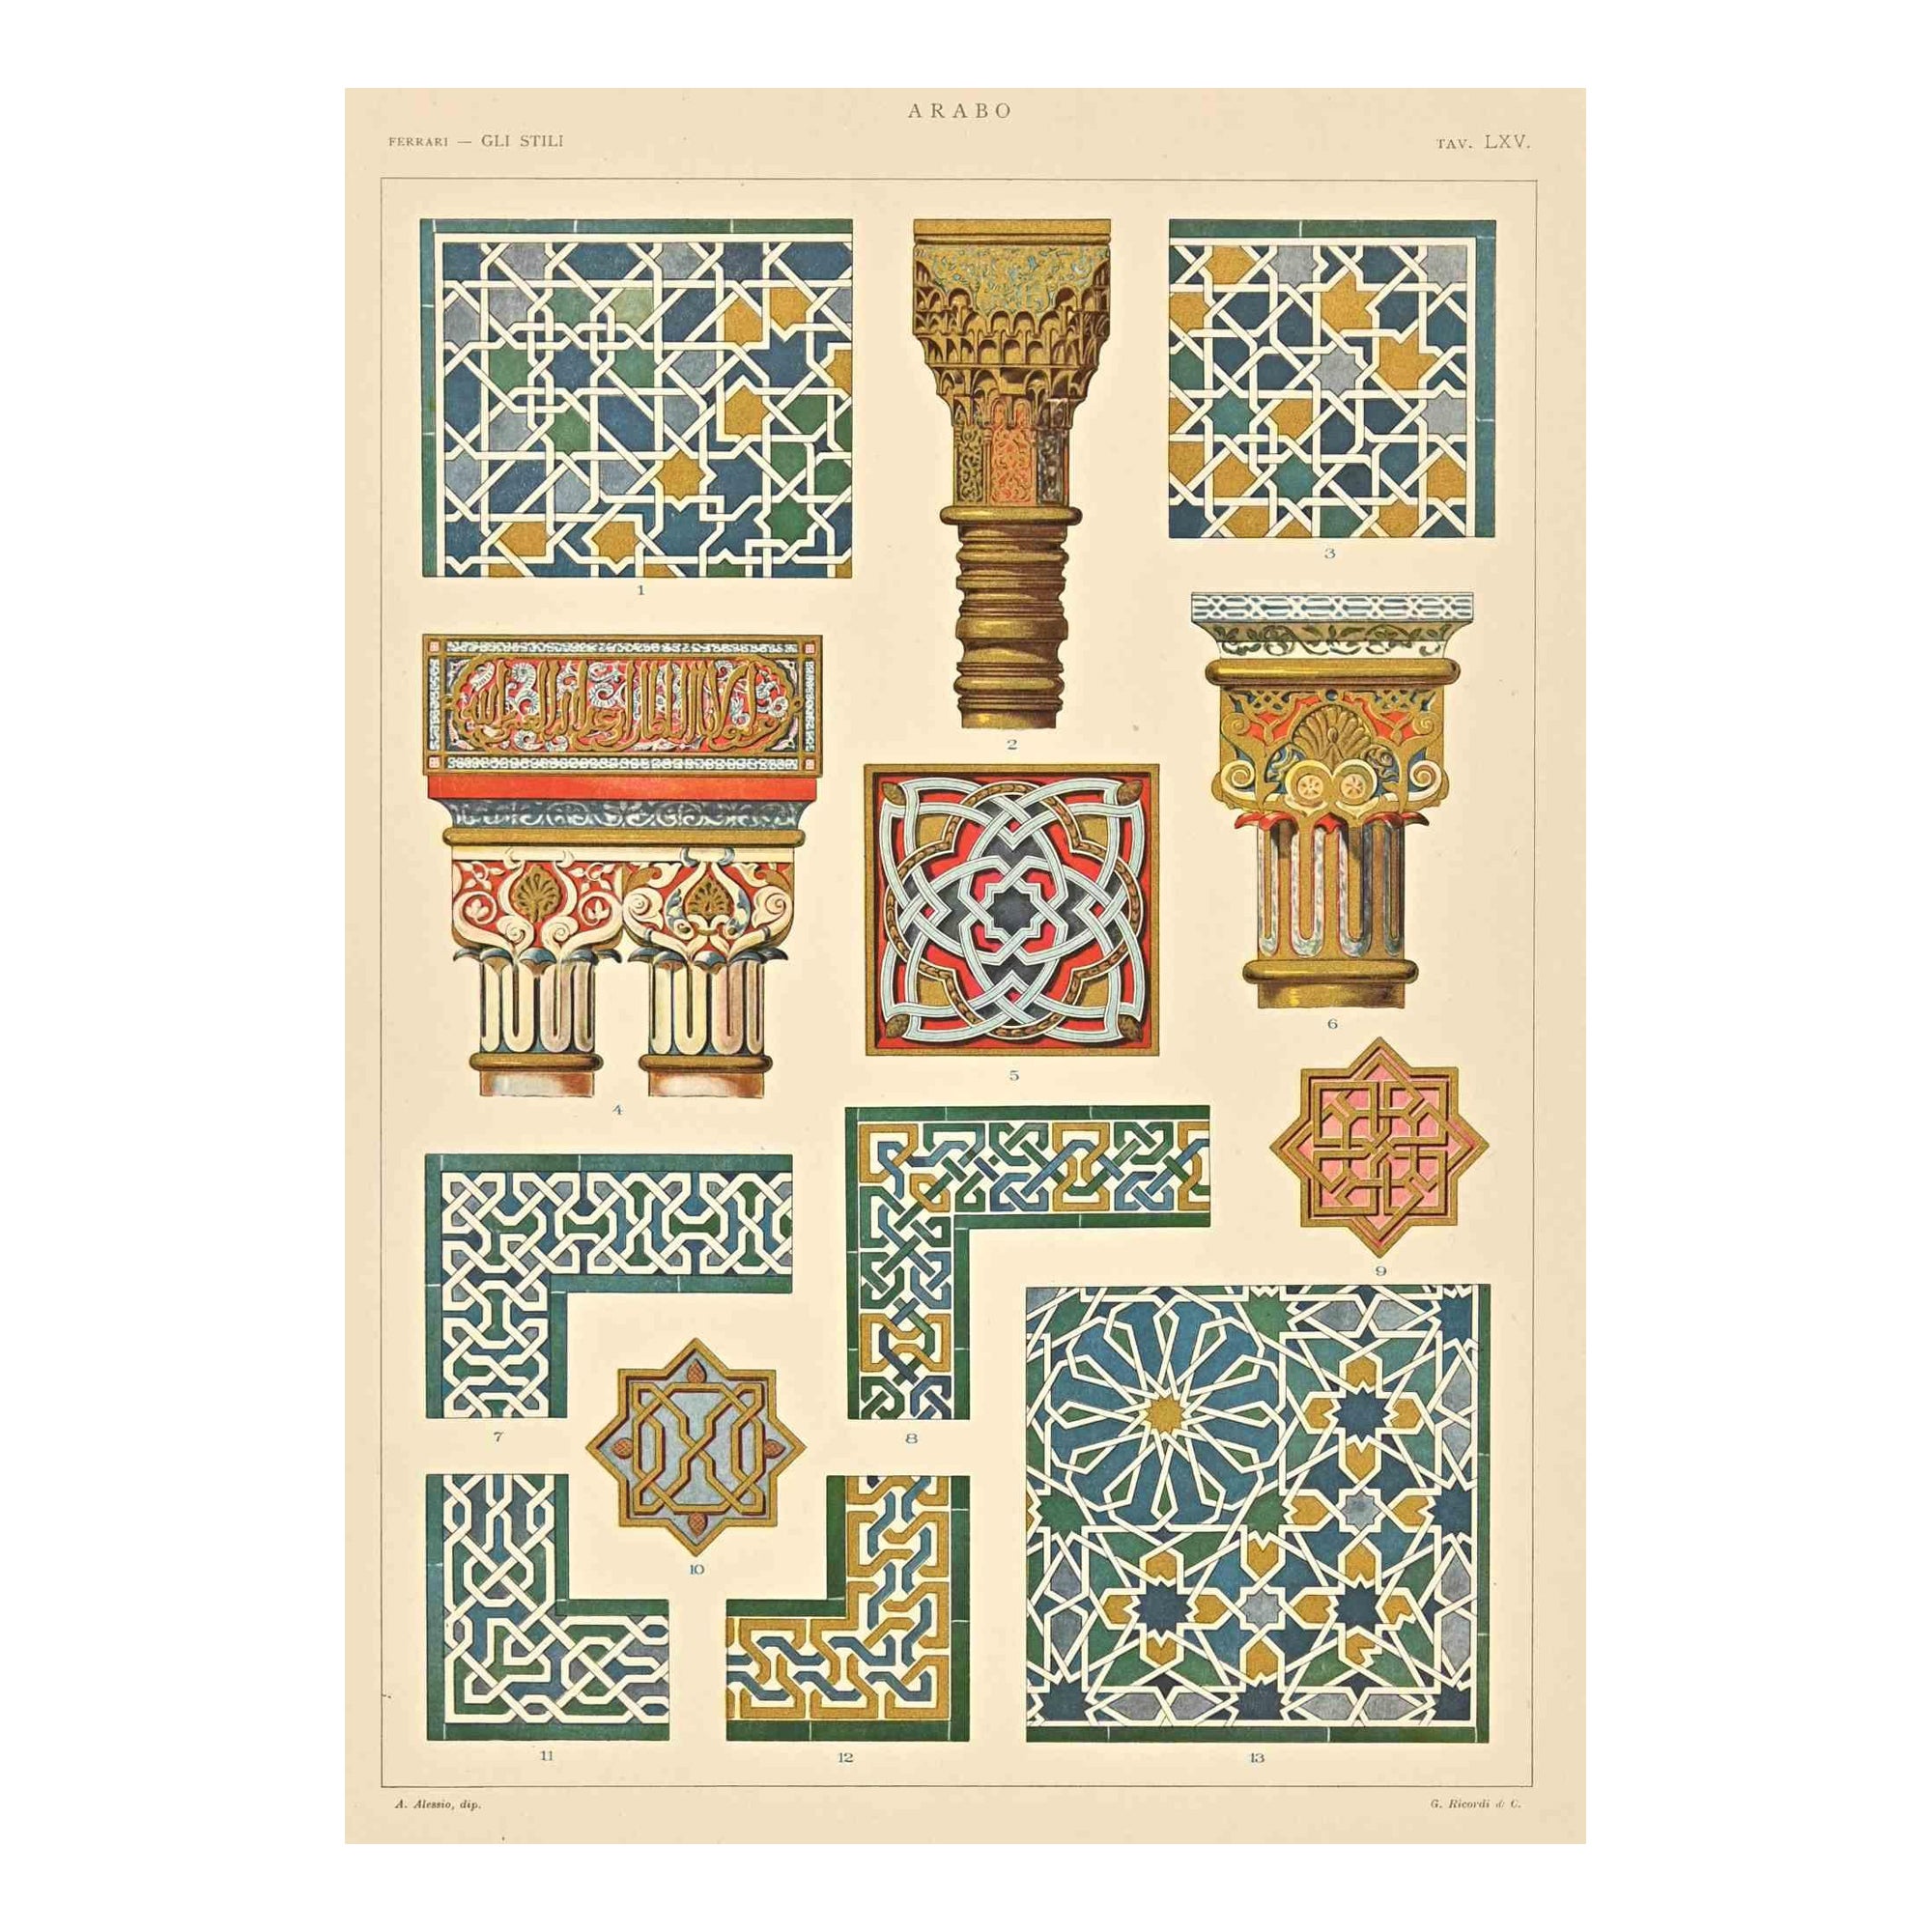 Decorative Motifs - Arabic Style is a print on Ivory-colored paper realized by an A. Alessio in the  early 20th Century

Vintage Chromolithograph.

Very good conditions.

The artwork represents Decorative motifs through well-defined details with